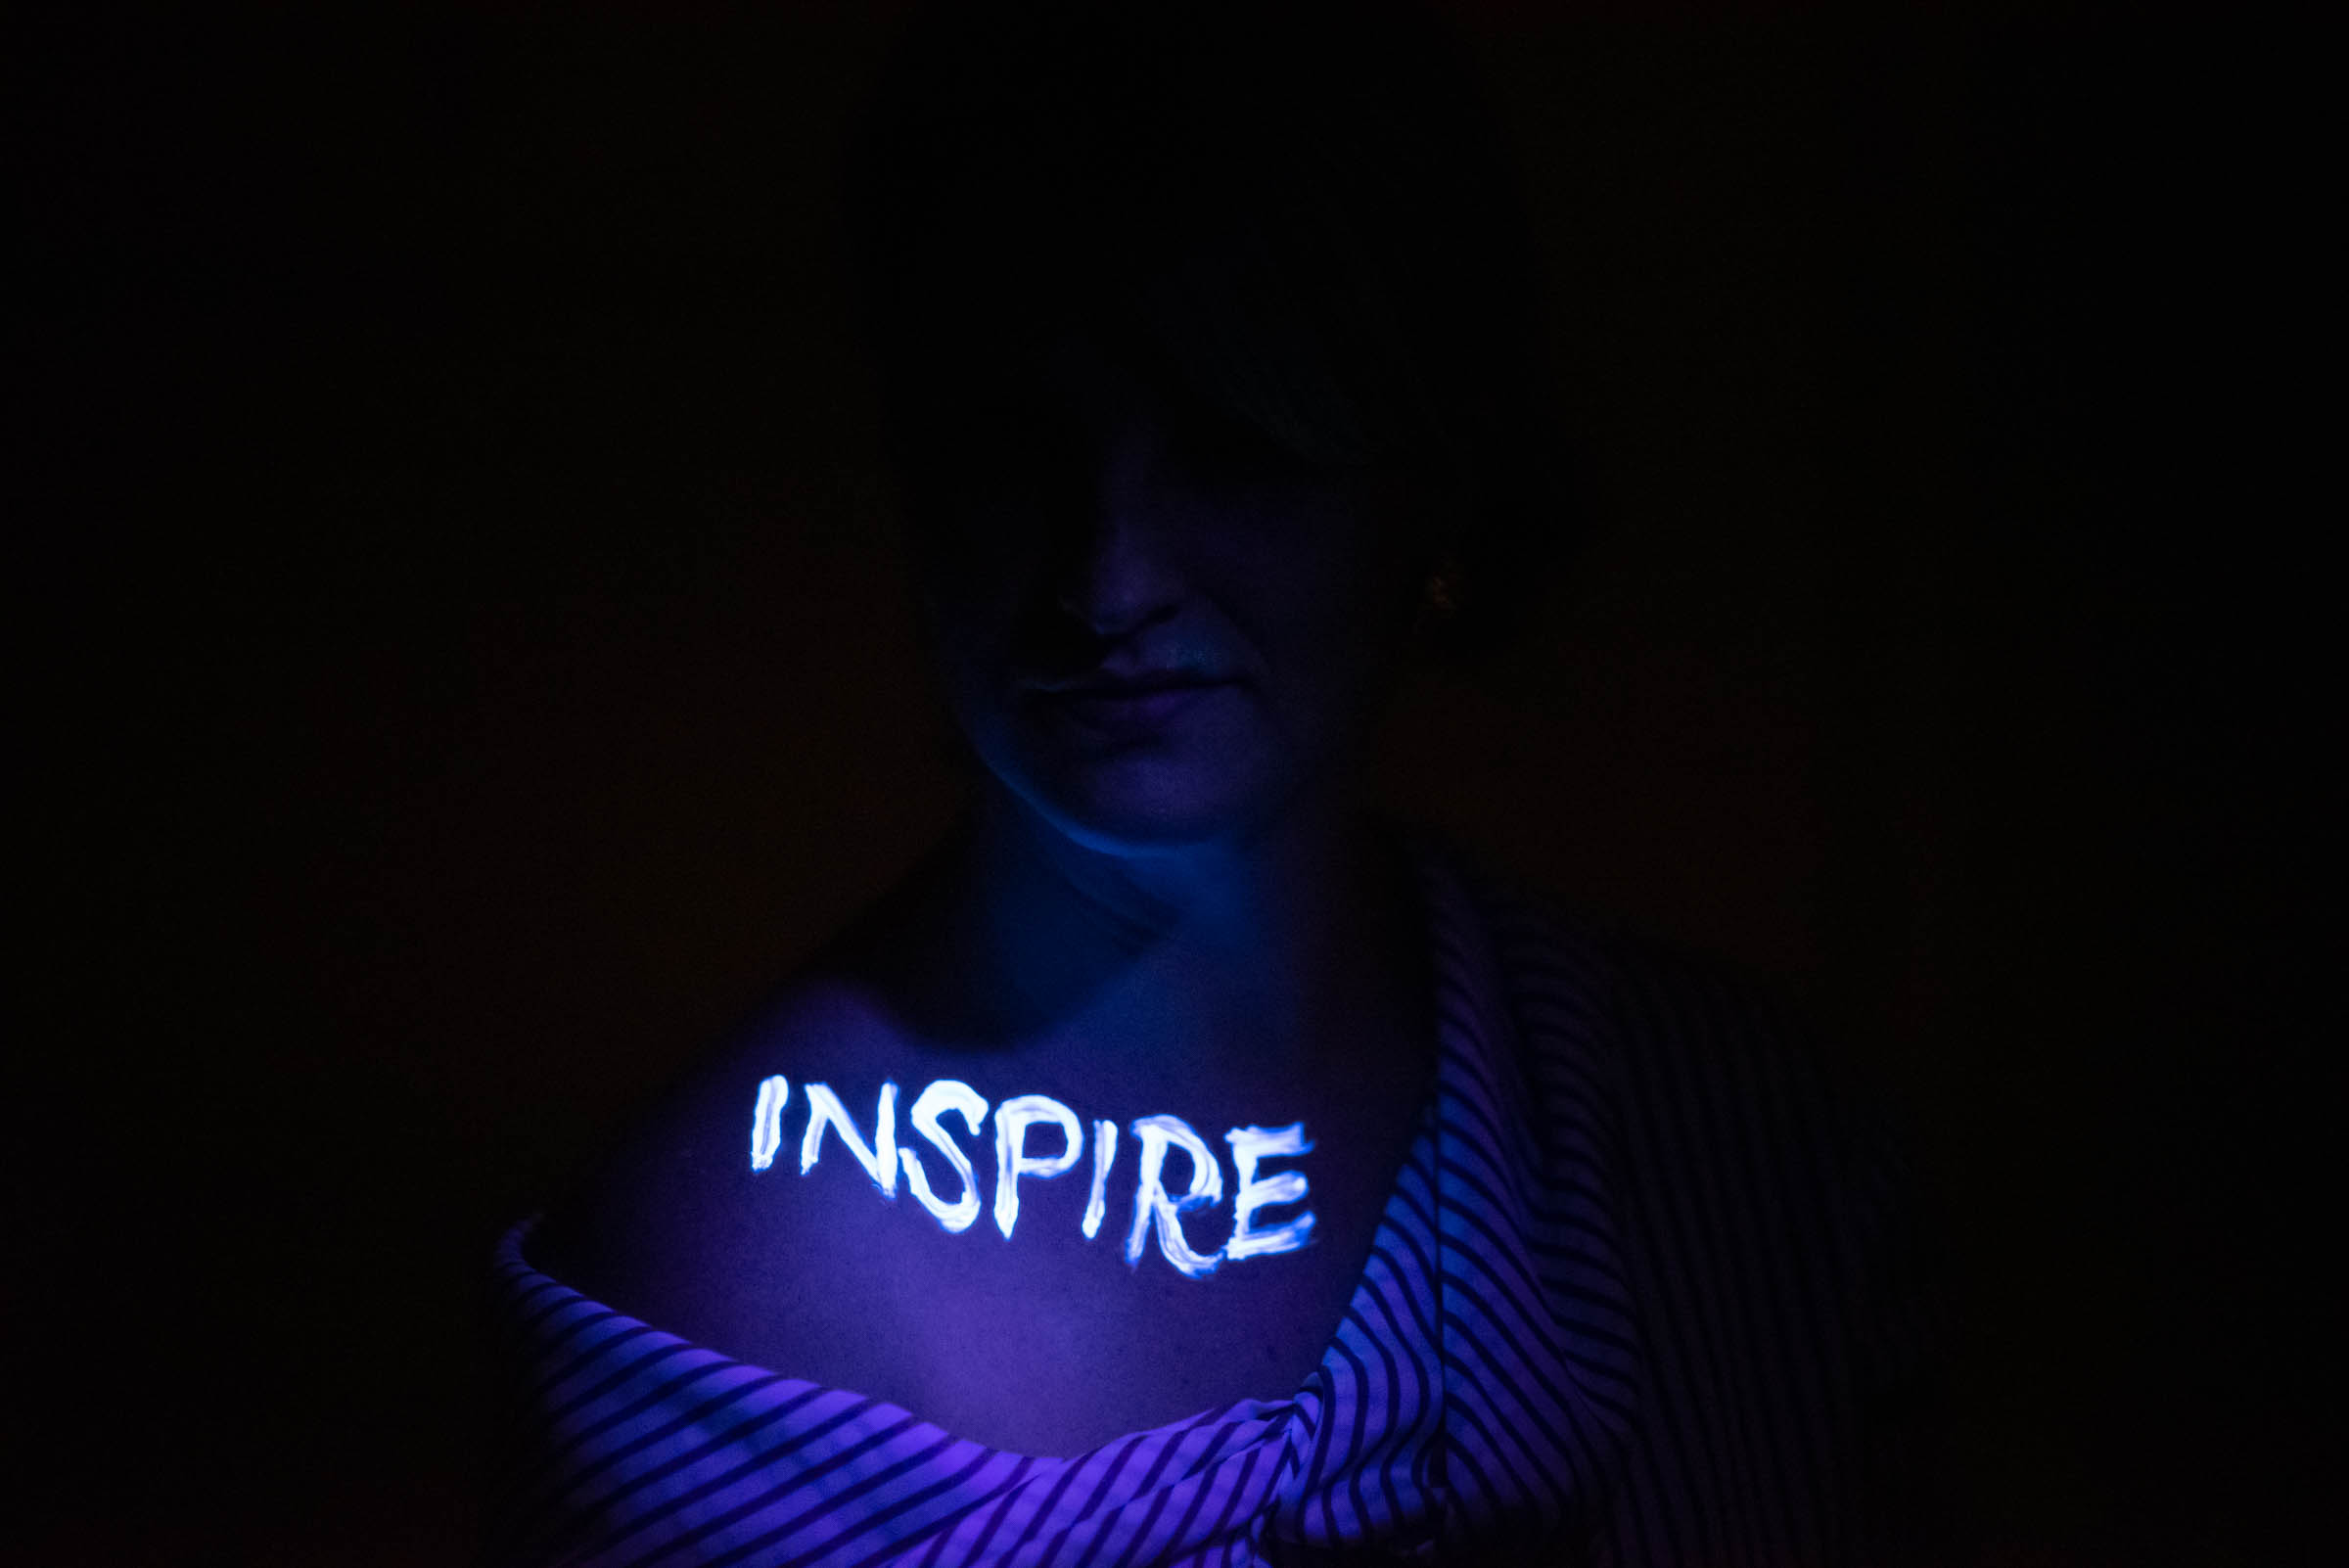 Part of my “Glow Portrait Series” My 2019 Mission - to Inspire.